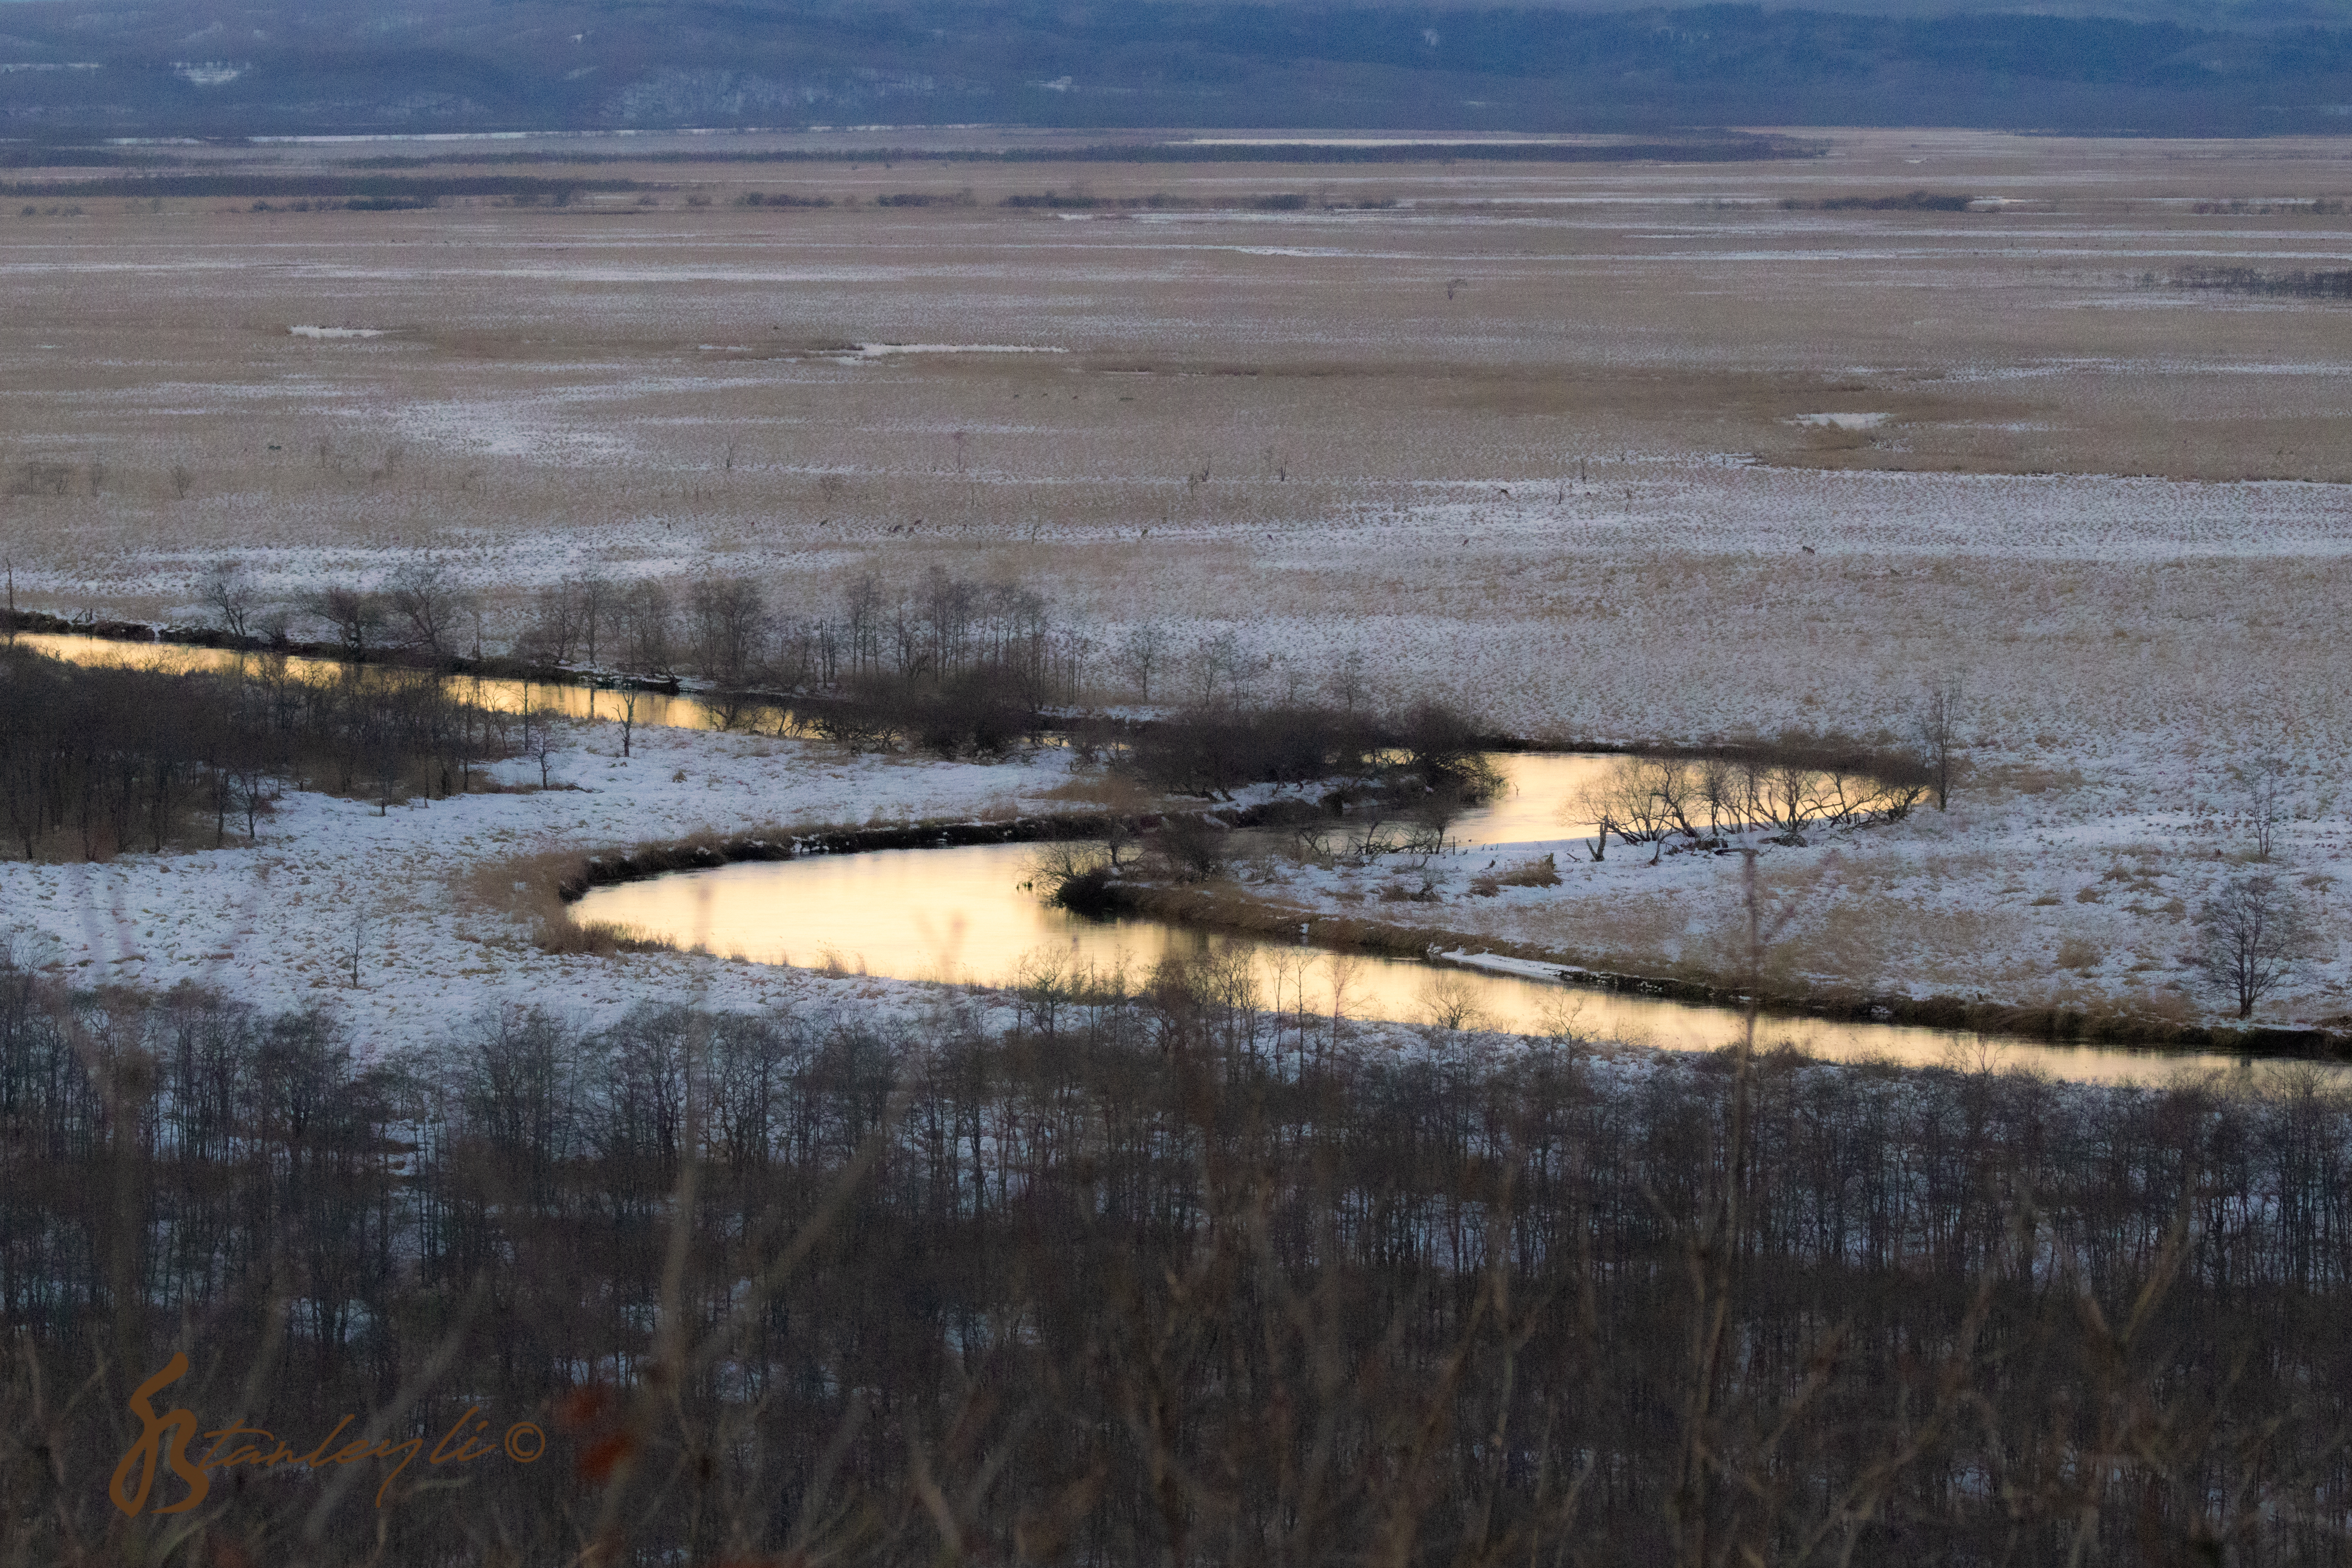 The colours of sunset are reflected in the meandering Kushiro River. The surrounding wetlands is dusted in snow.